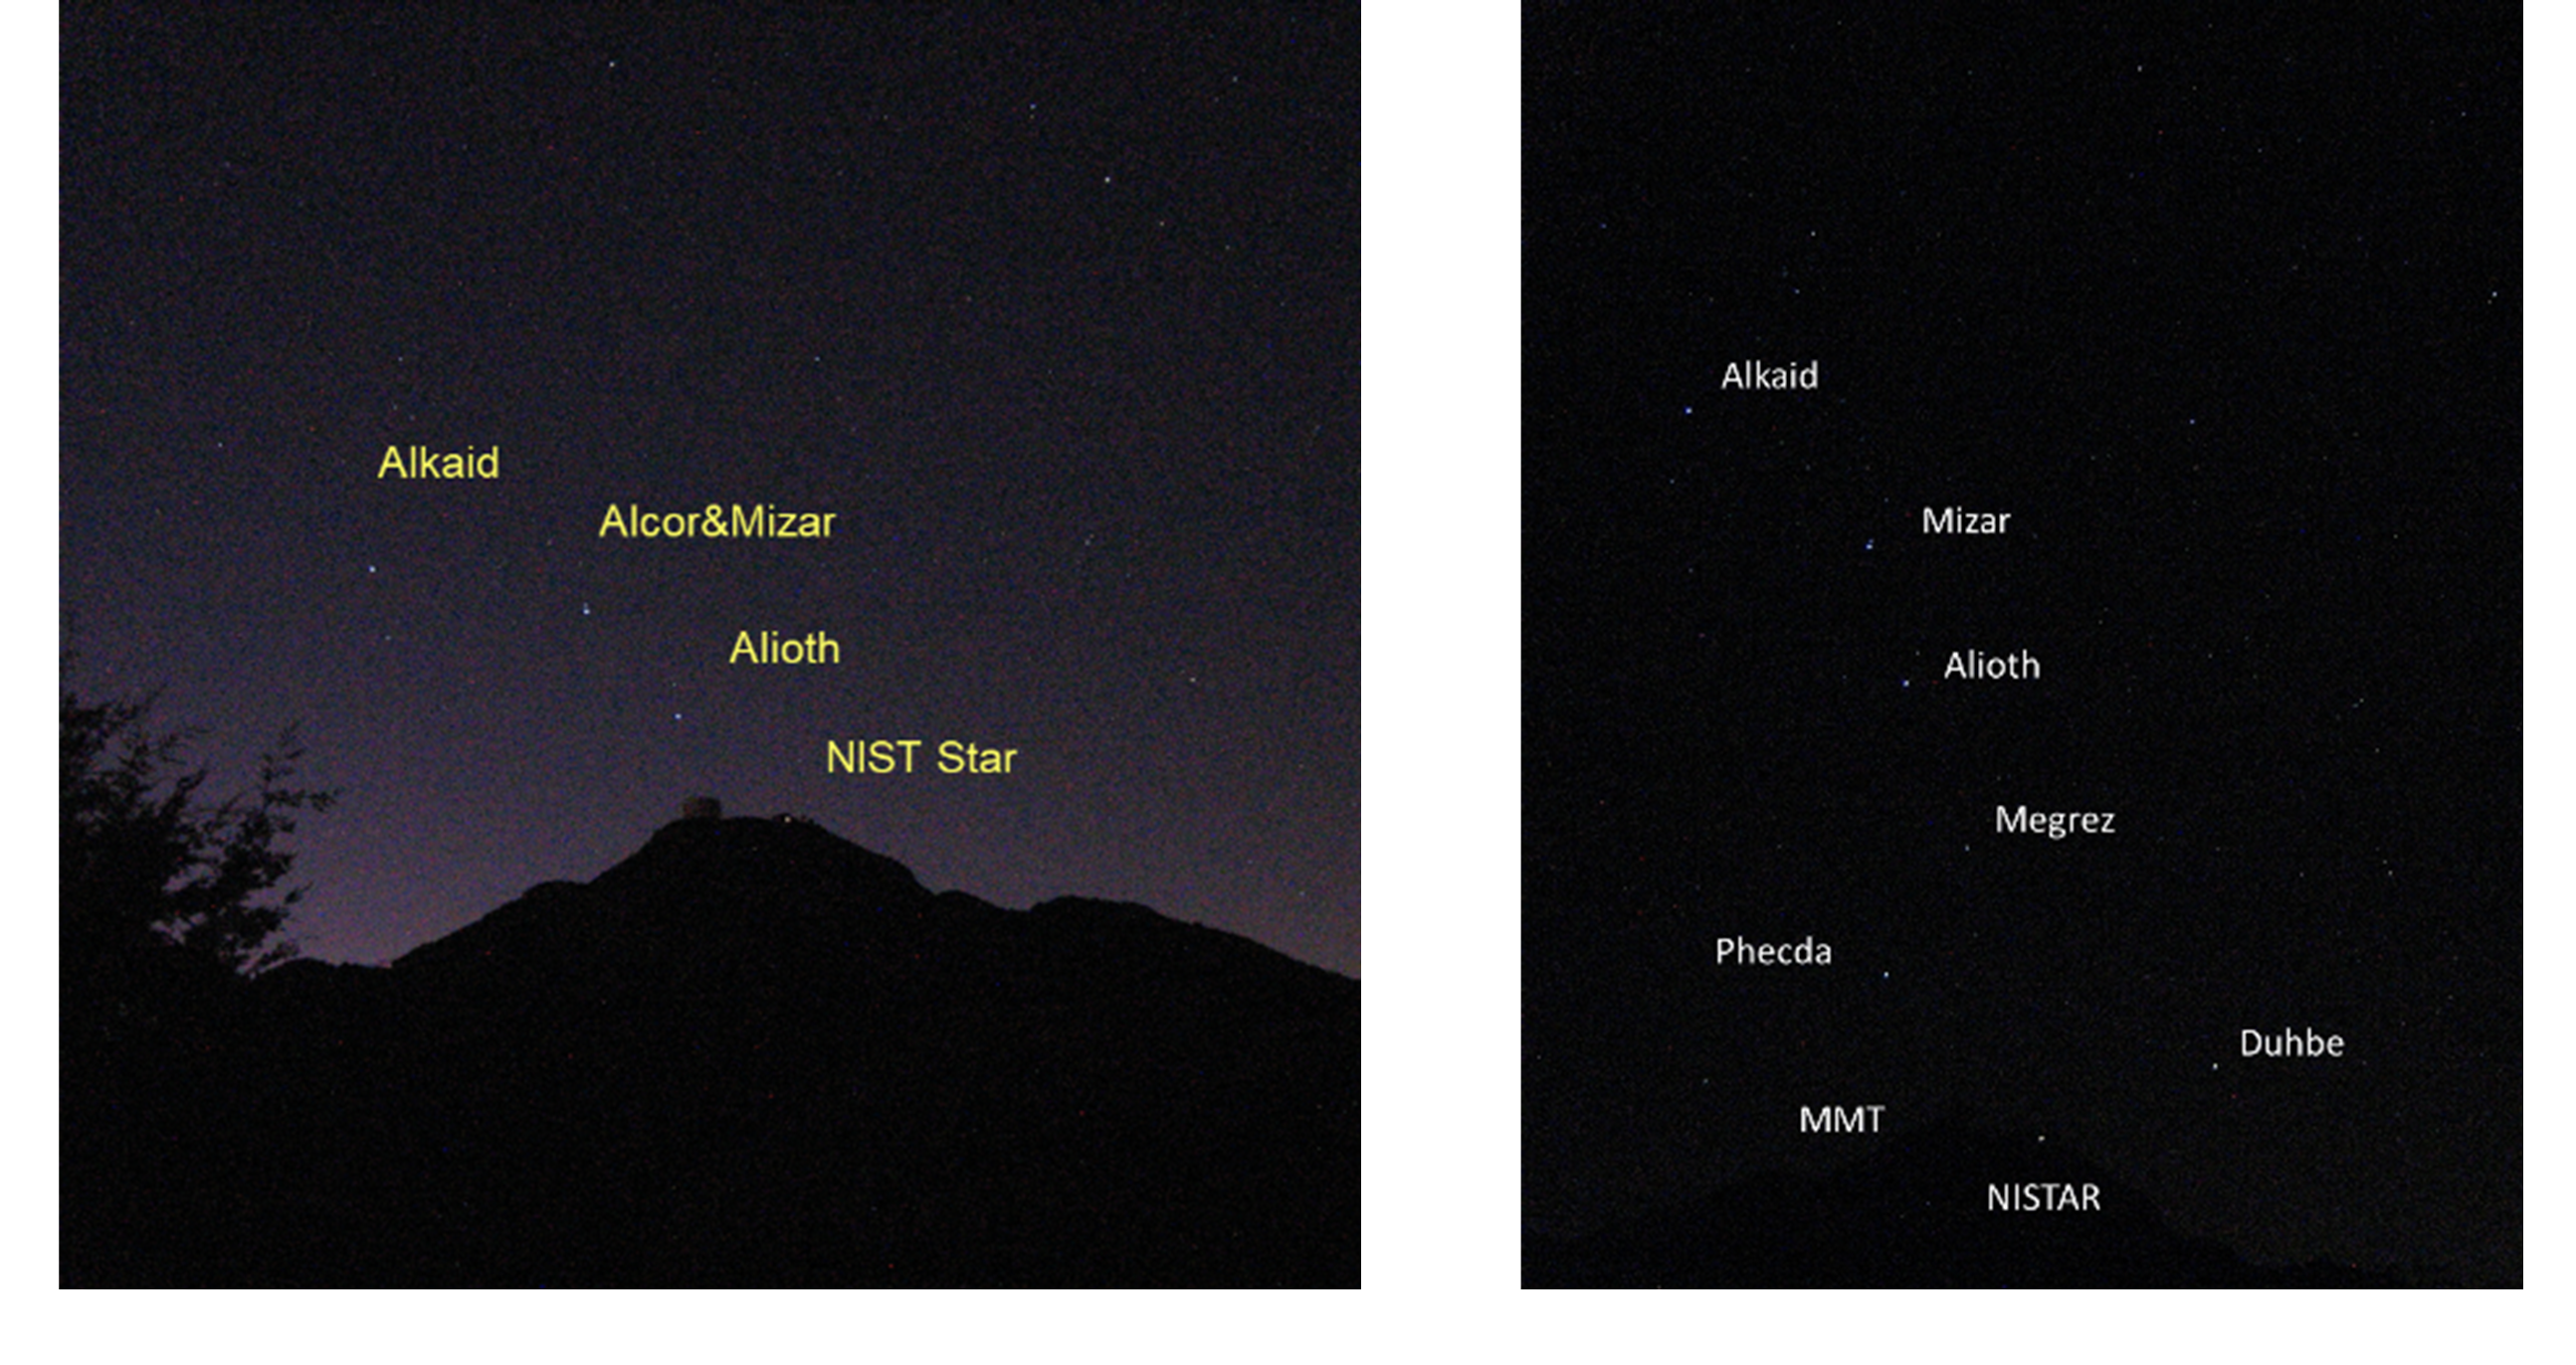 Side-by-side night sky images show stars of the Big Dipper and NISTAR labeled with their names.